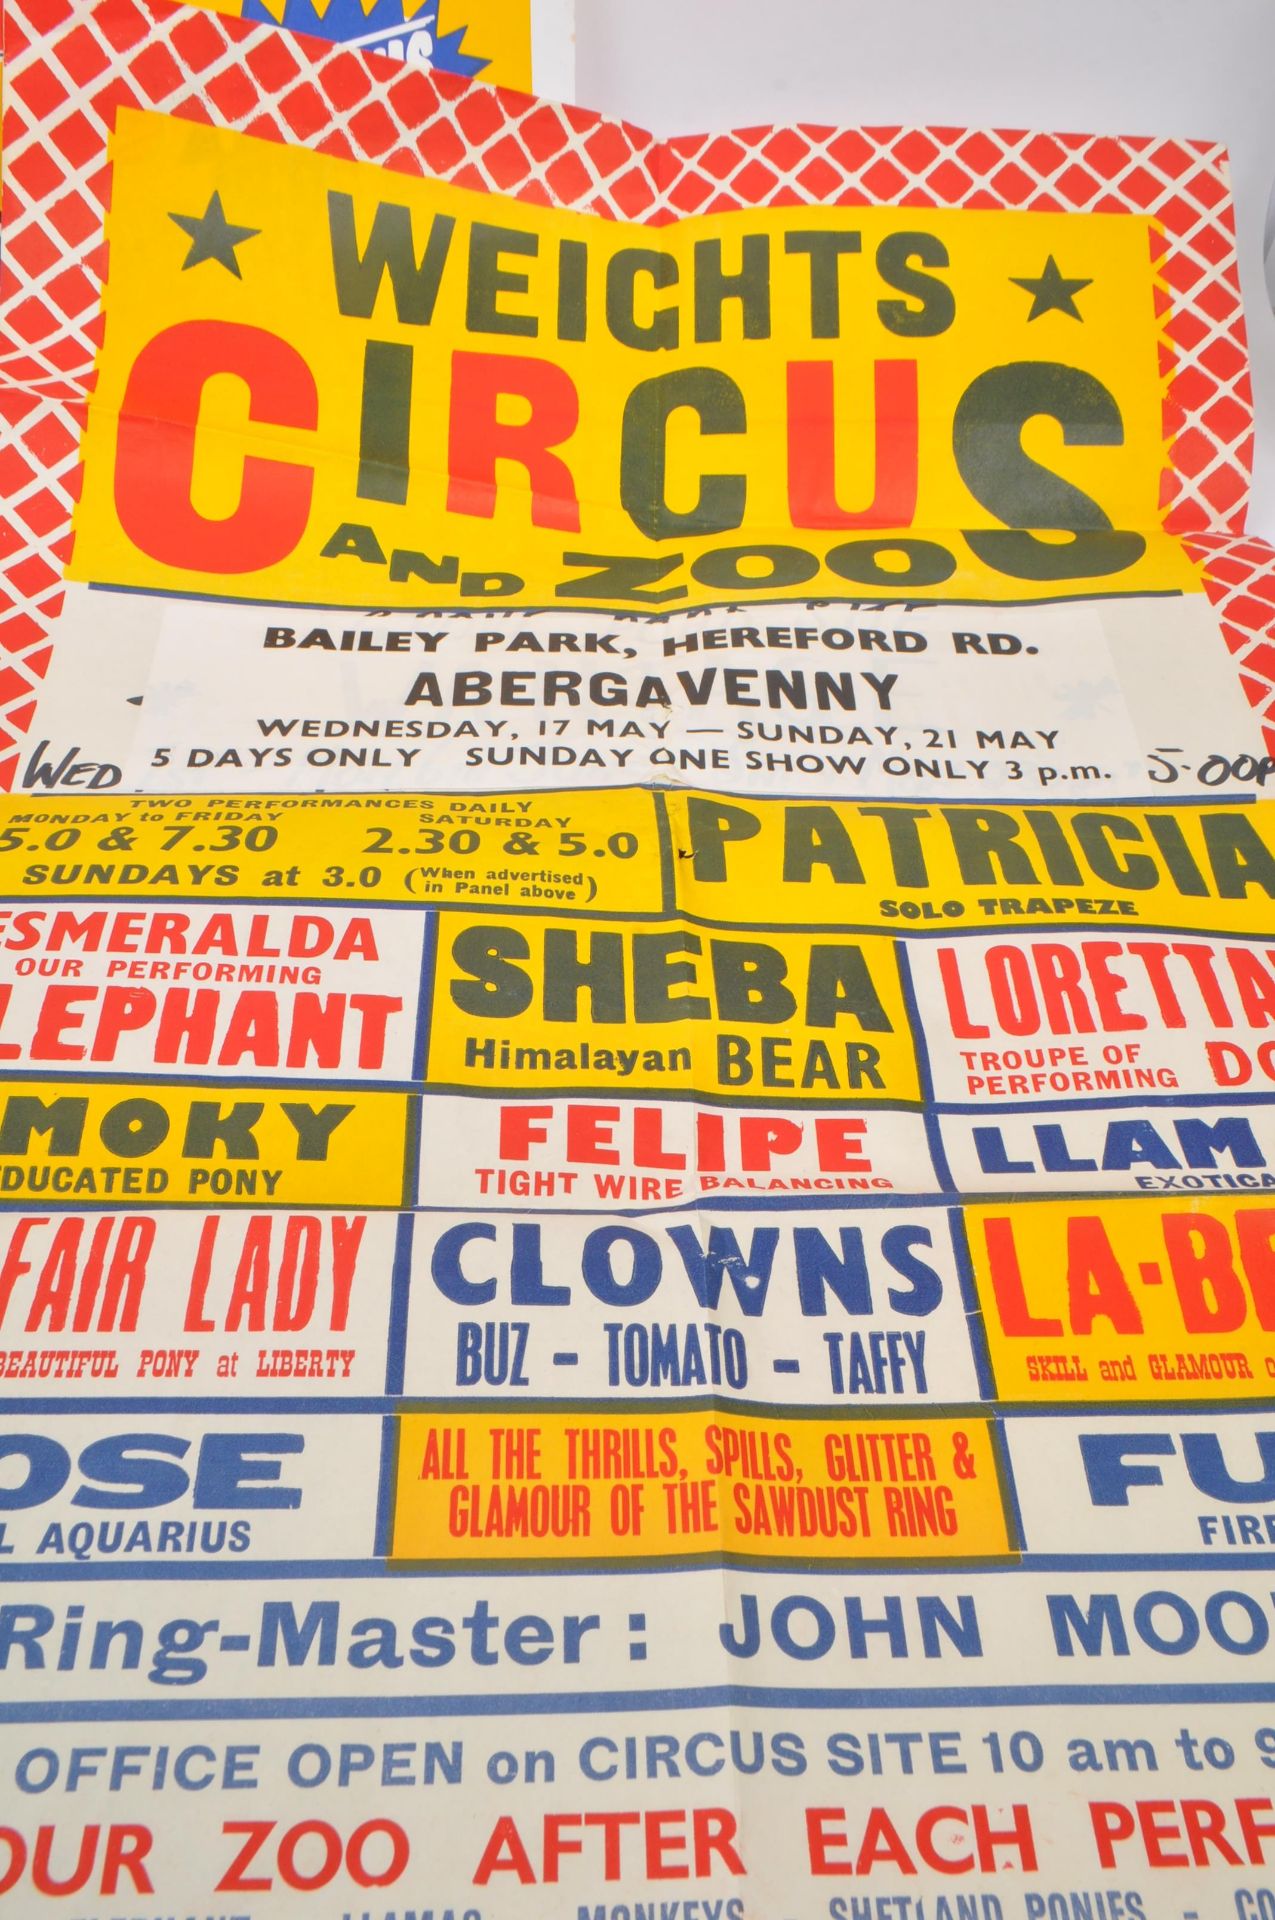 COLLECTION OF FOUR 1970S / 80S WEIGHT'S CIRCUS POSTERS - Image 3 of 5